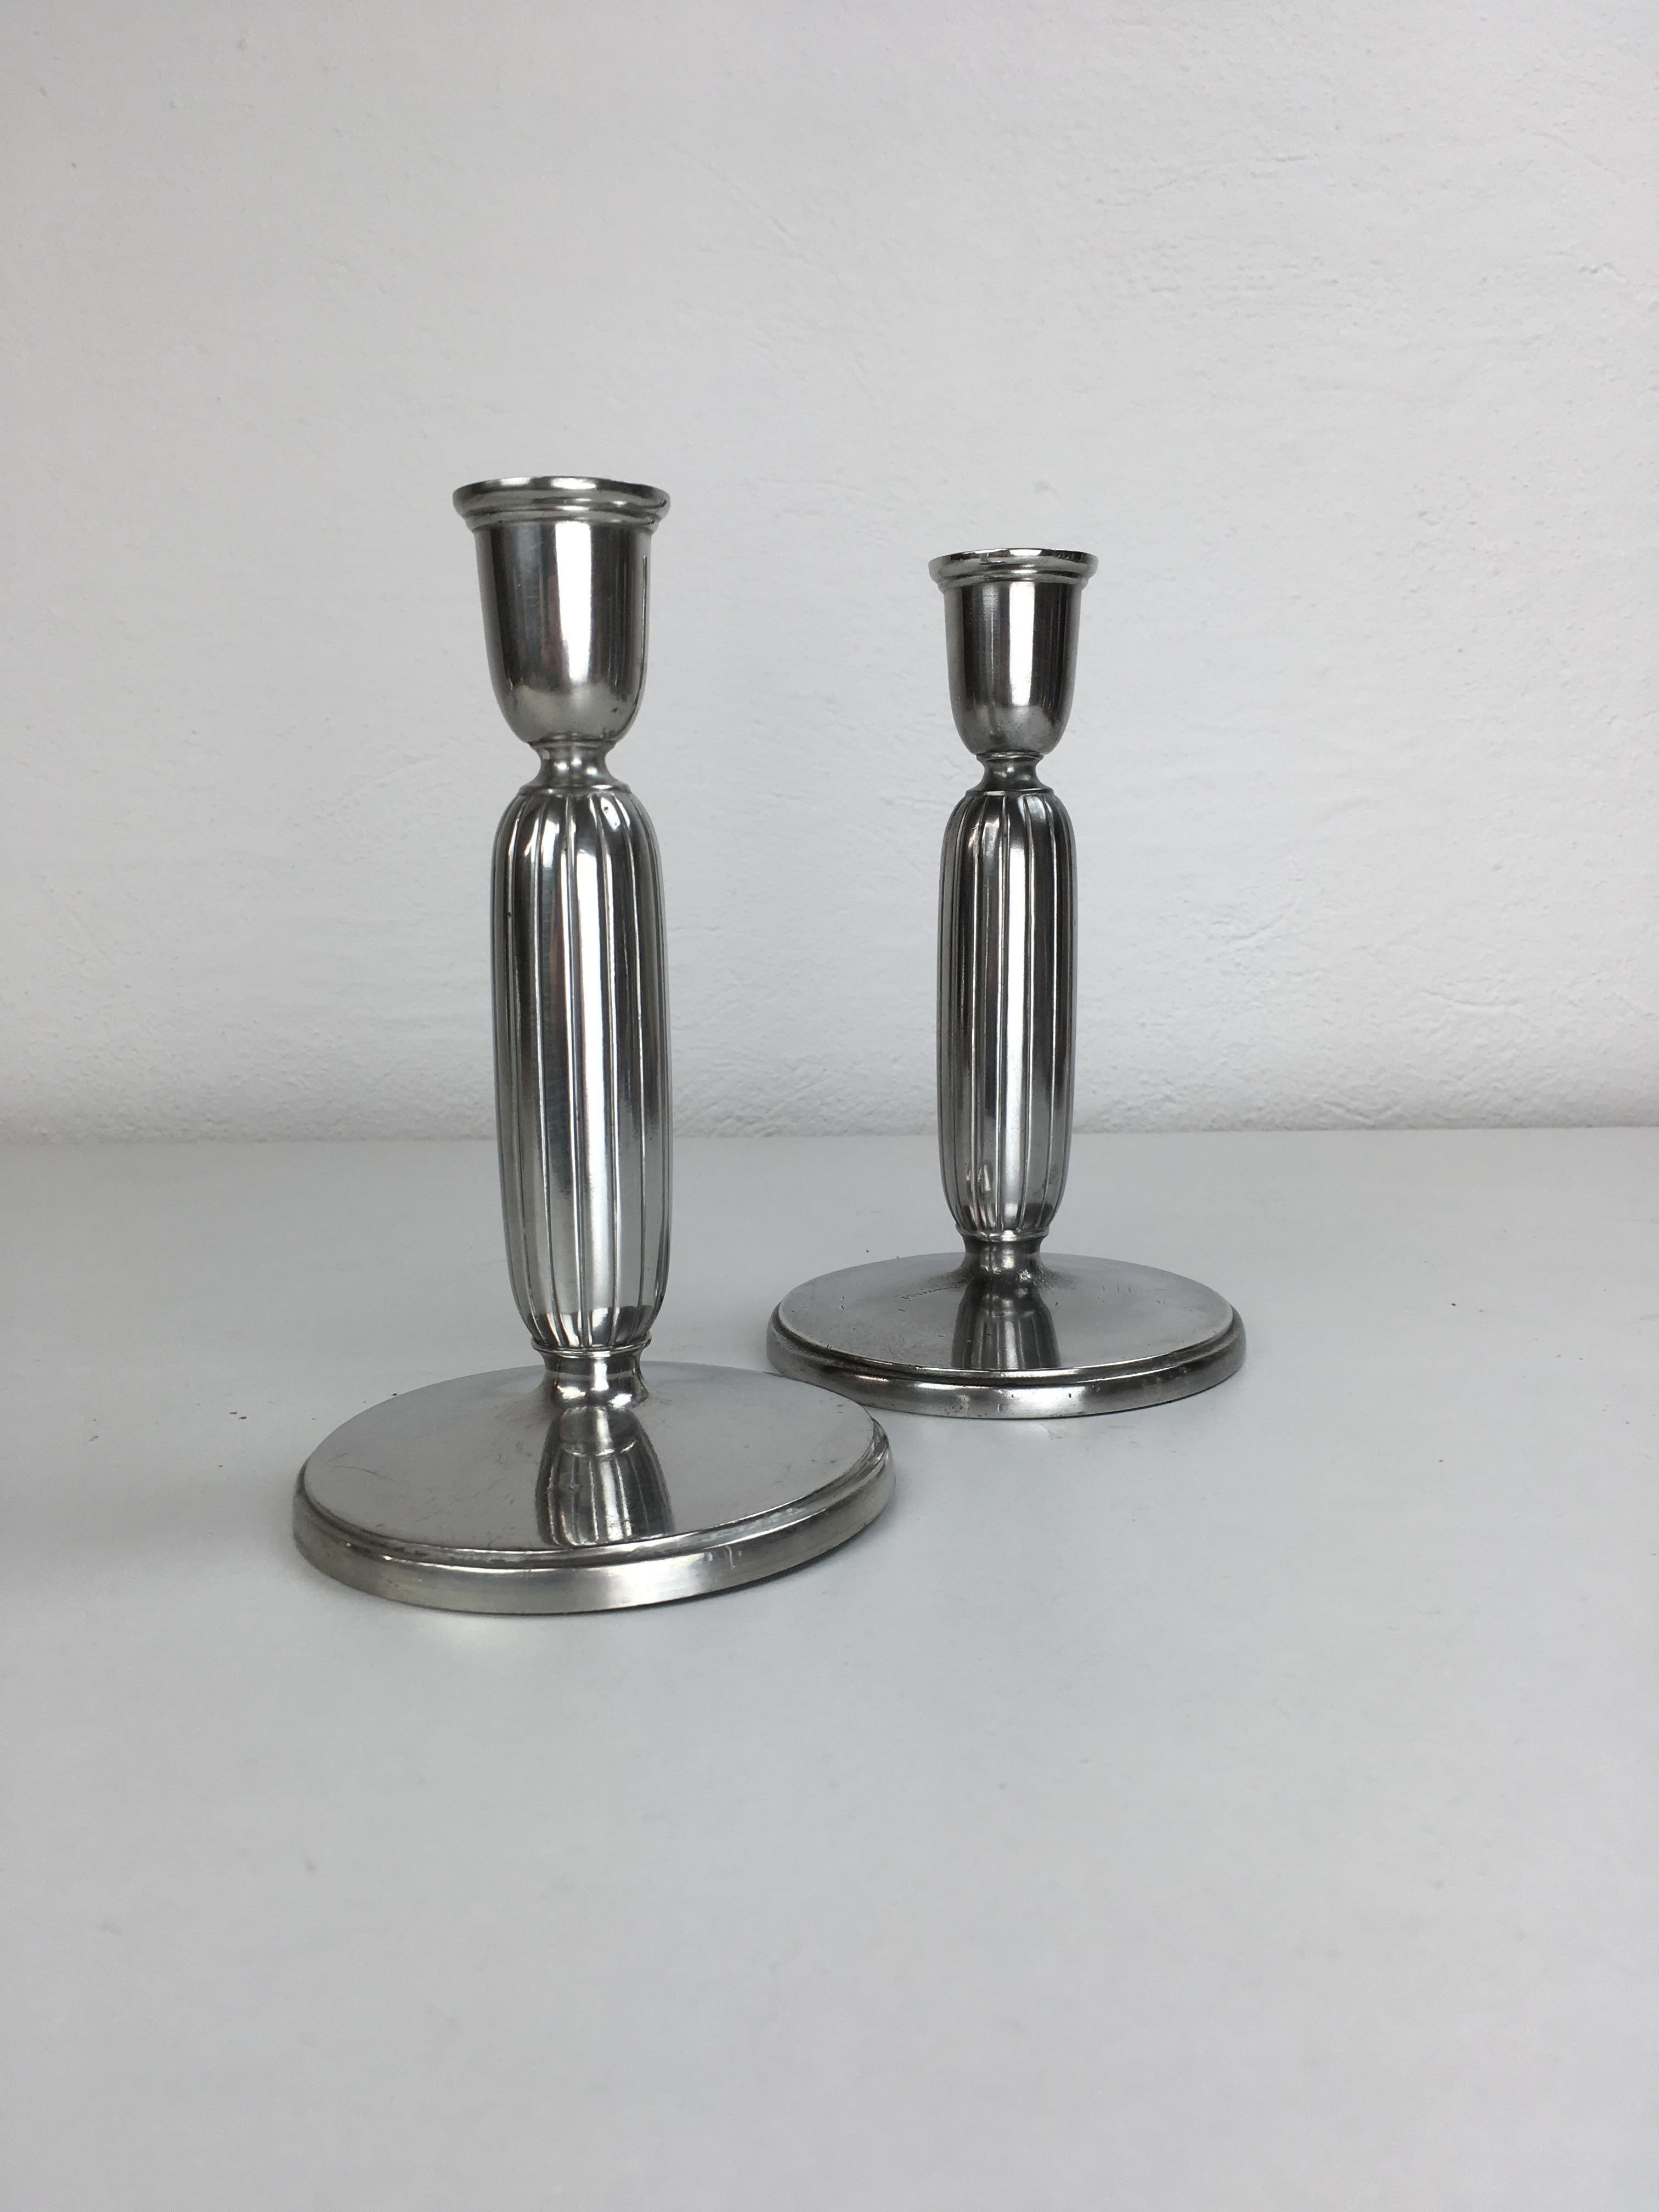 Set of two Danish Just Andersen art deco pewter candle holders produced by Just Andersen A/S in the 1940 - 1950's.

The candle holders are in good vintage condition and marked with Just. Andersens triangle mark. 

Just Andersen 1884-1943 was born in